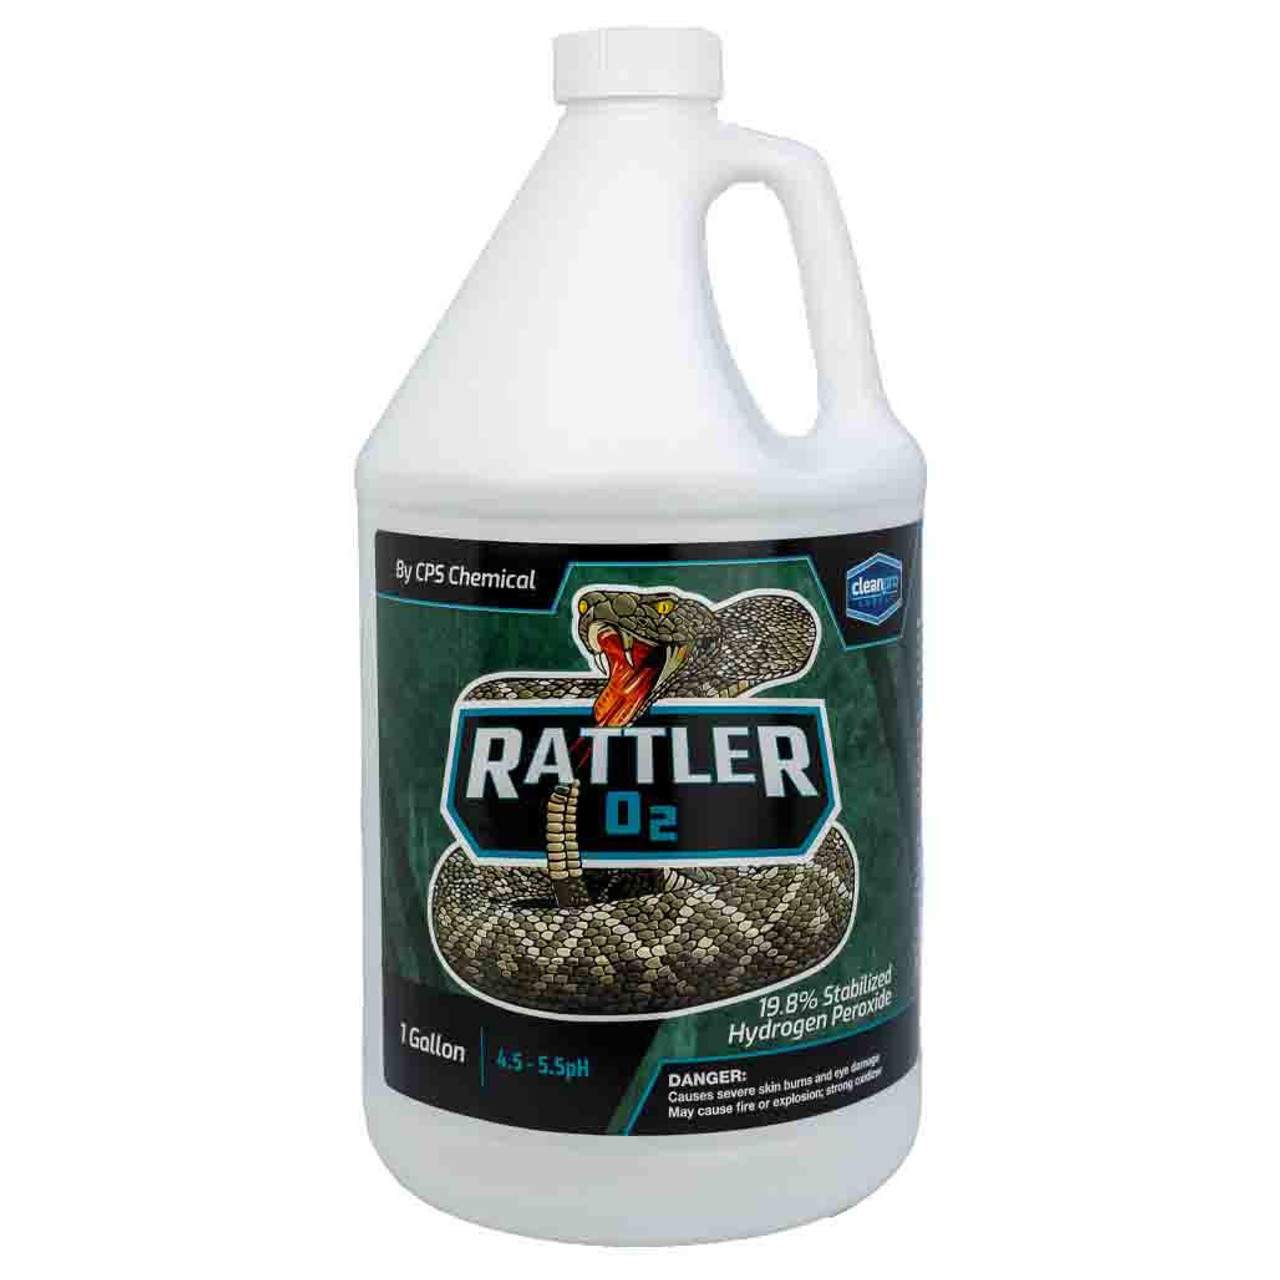 CleanPro Chemical CPS Rattler O2 Stabilized 19.8percent Hydrogen Peroxide - Gallon